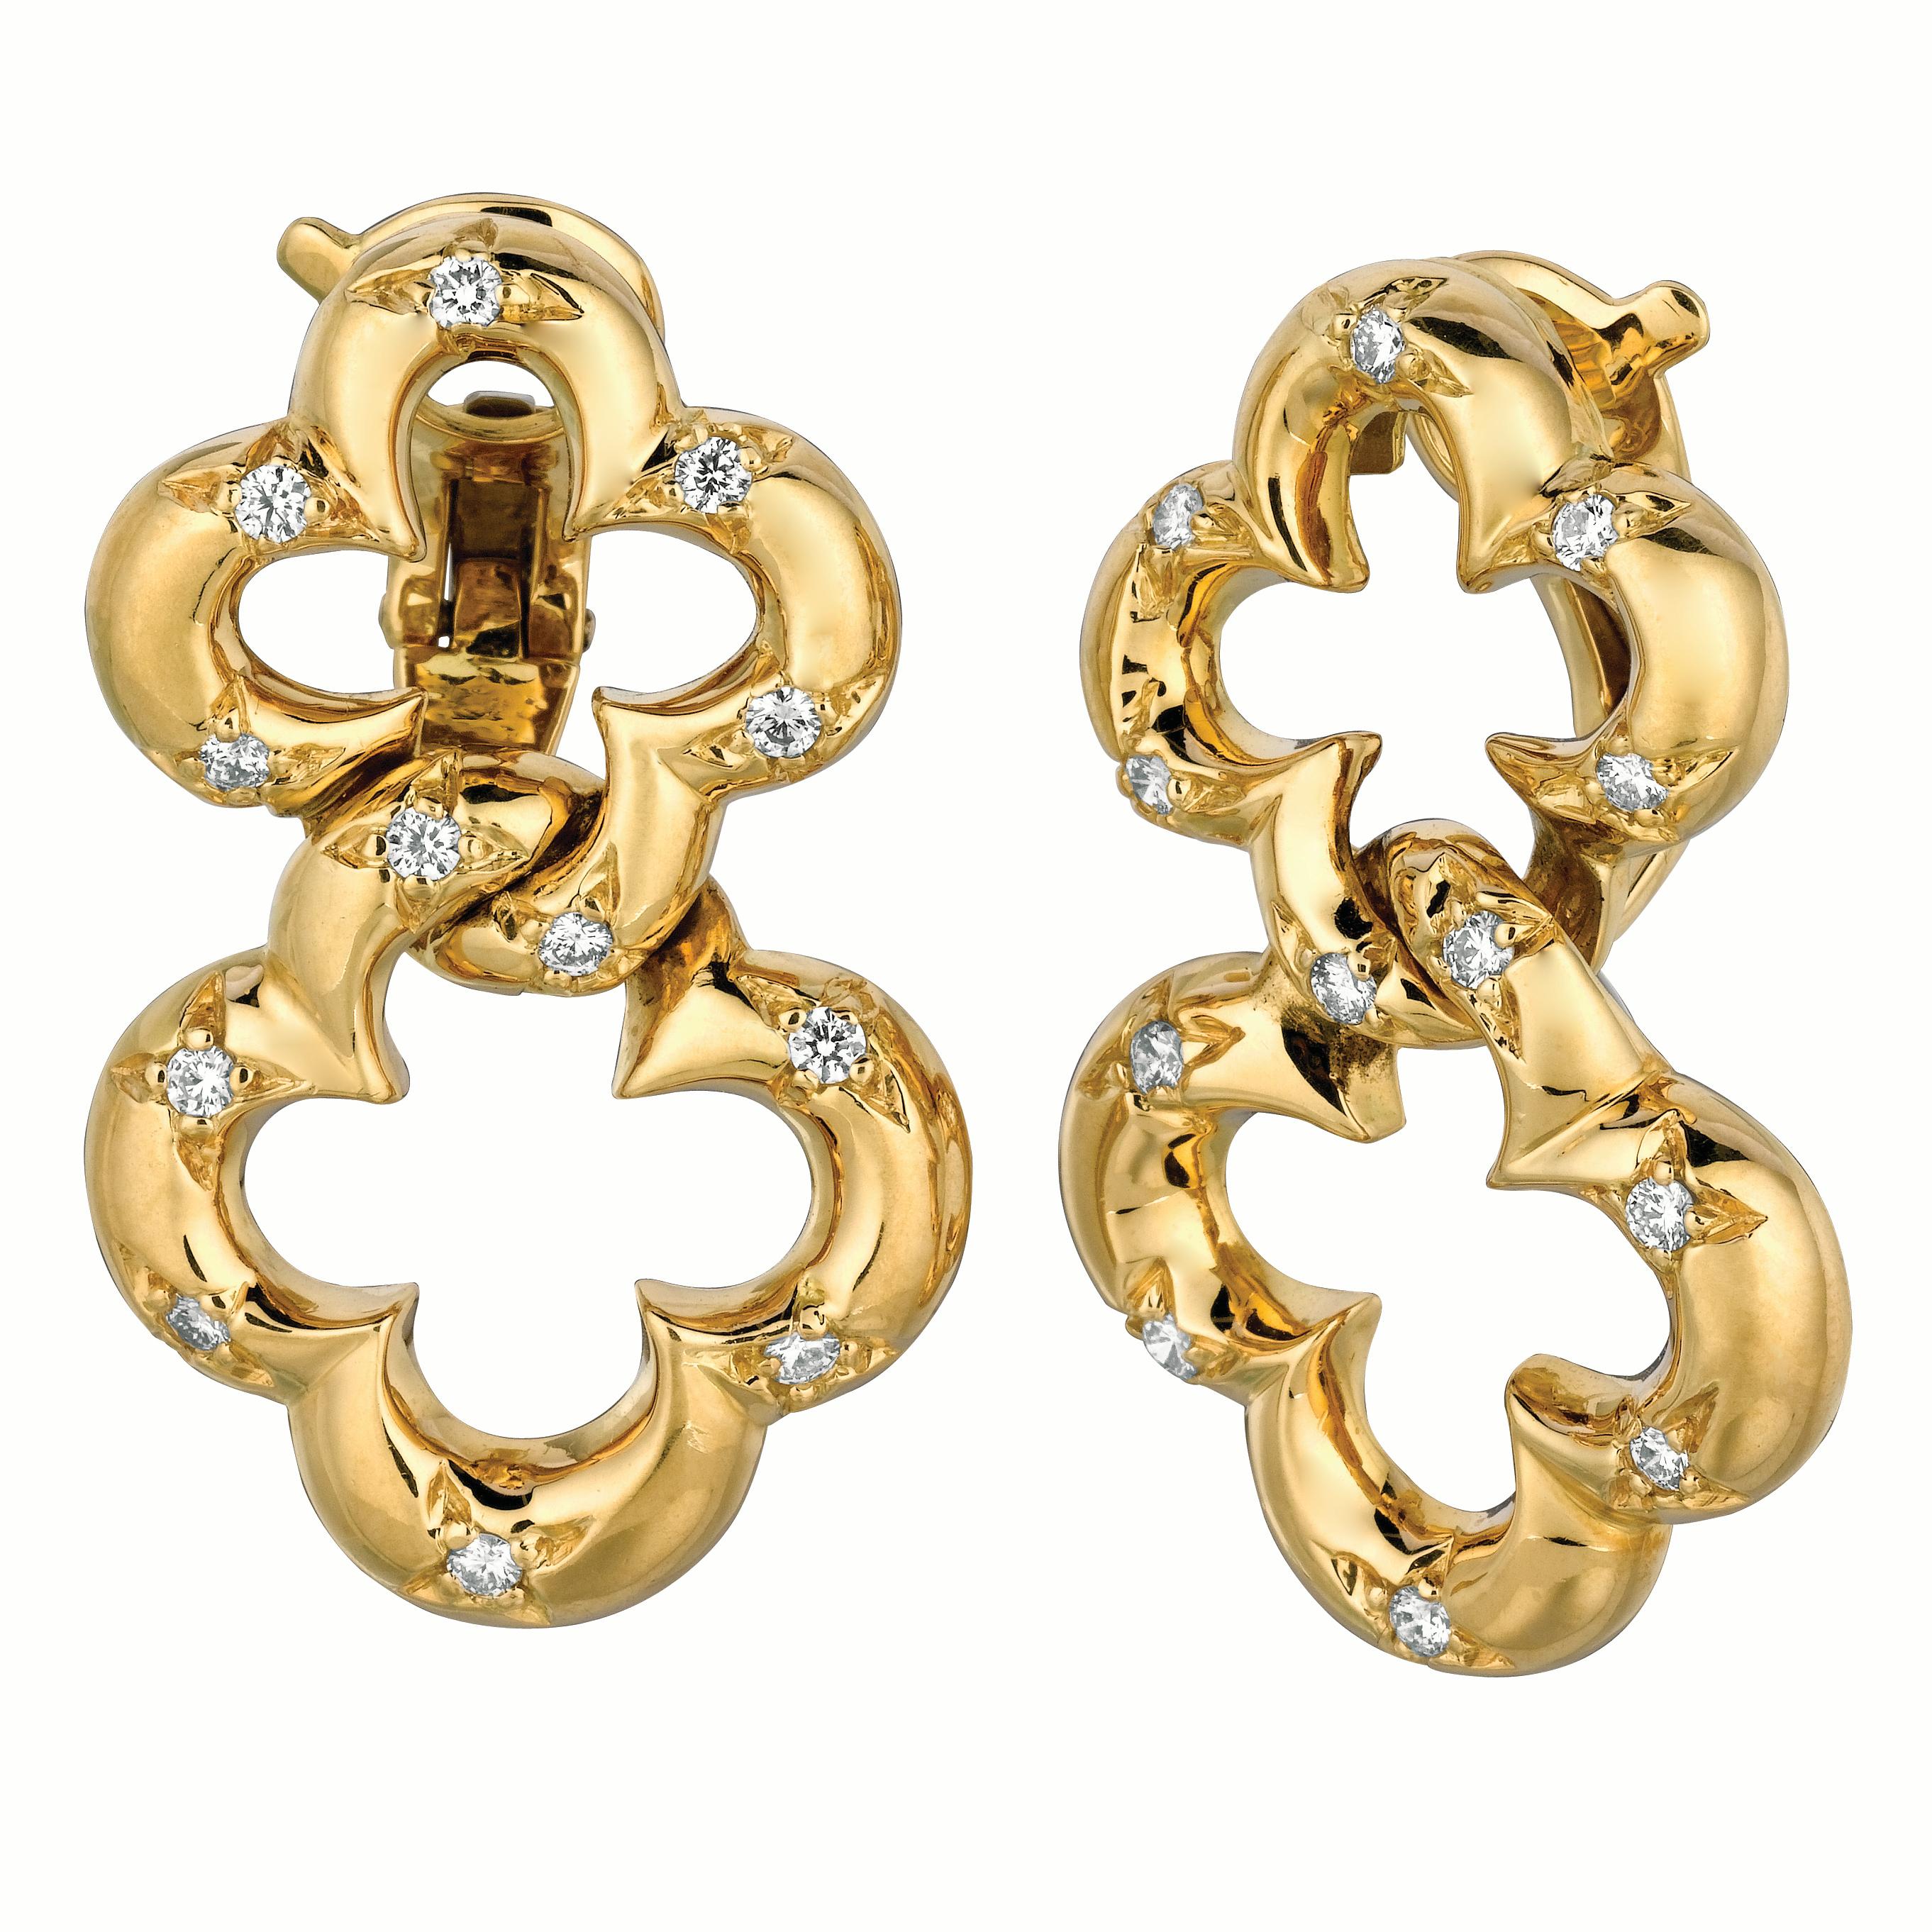 These double clover diamond drop earrings are 